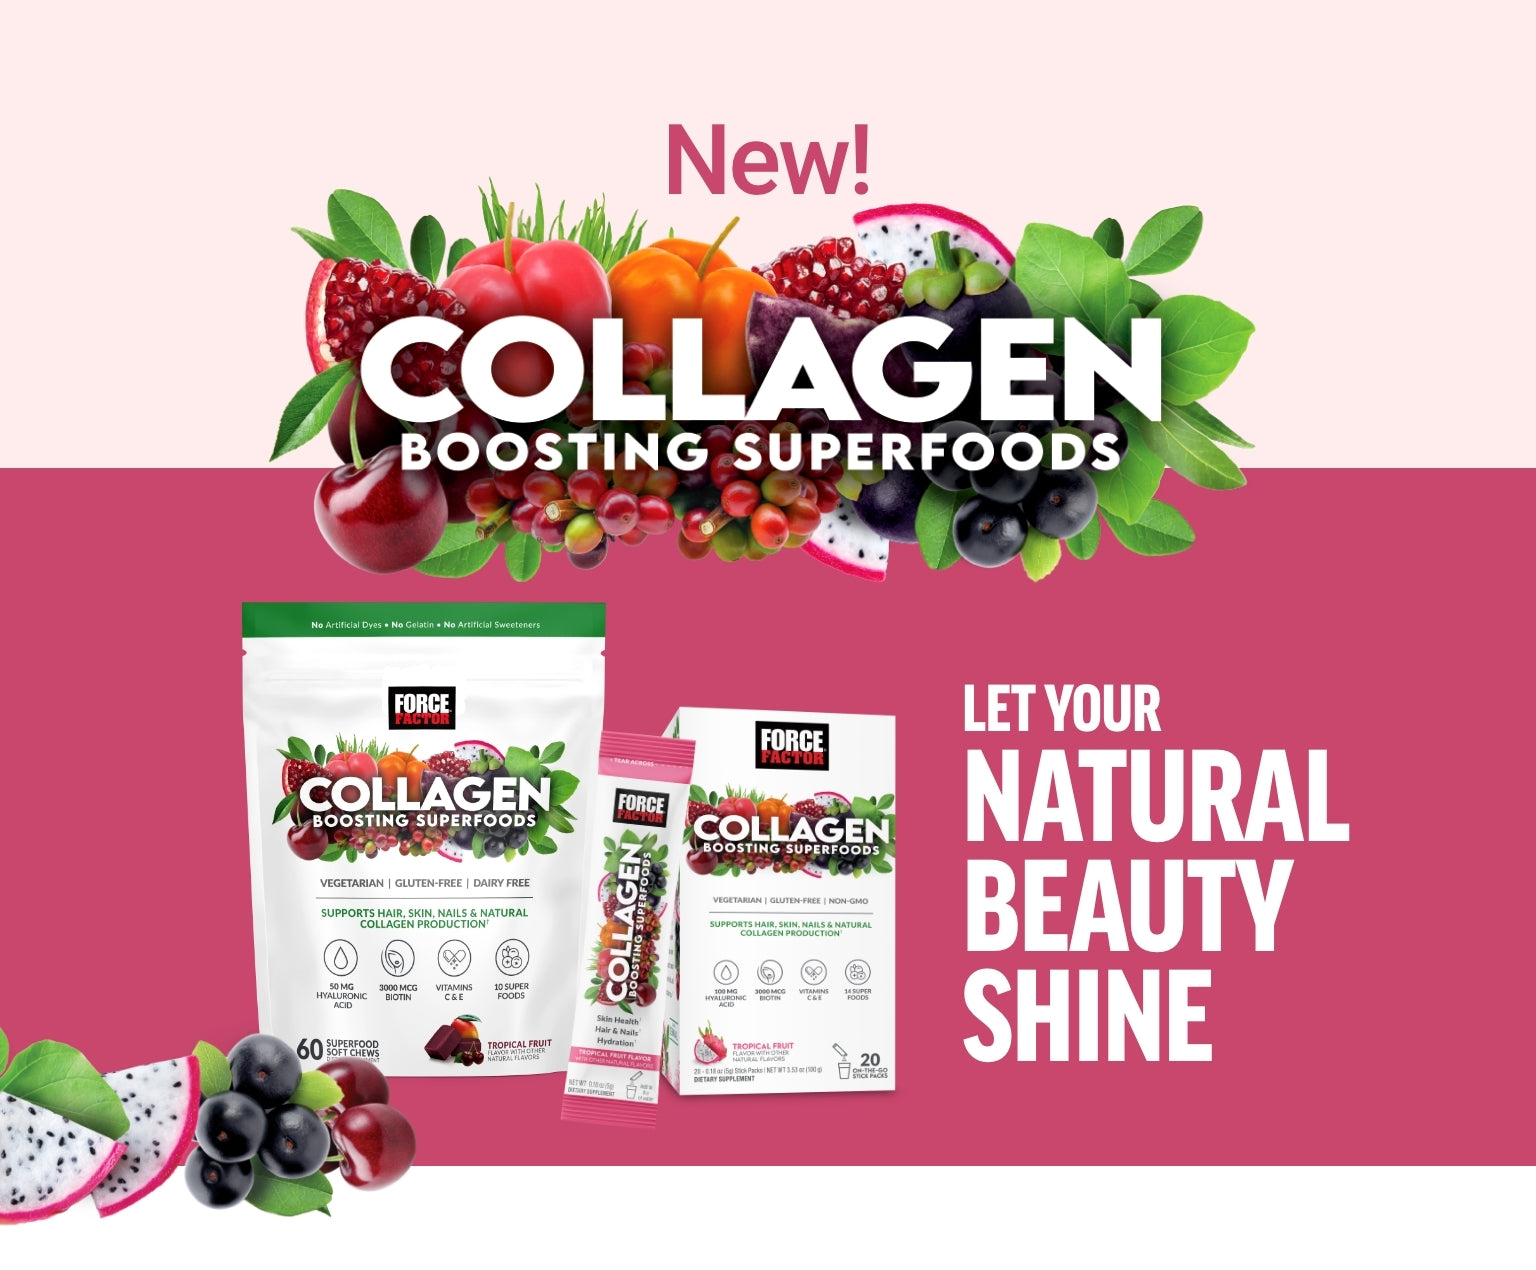 New! Collagen Boosting Superfoods. Let Your Natural Beauty Shine